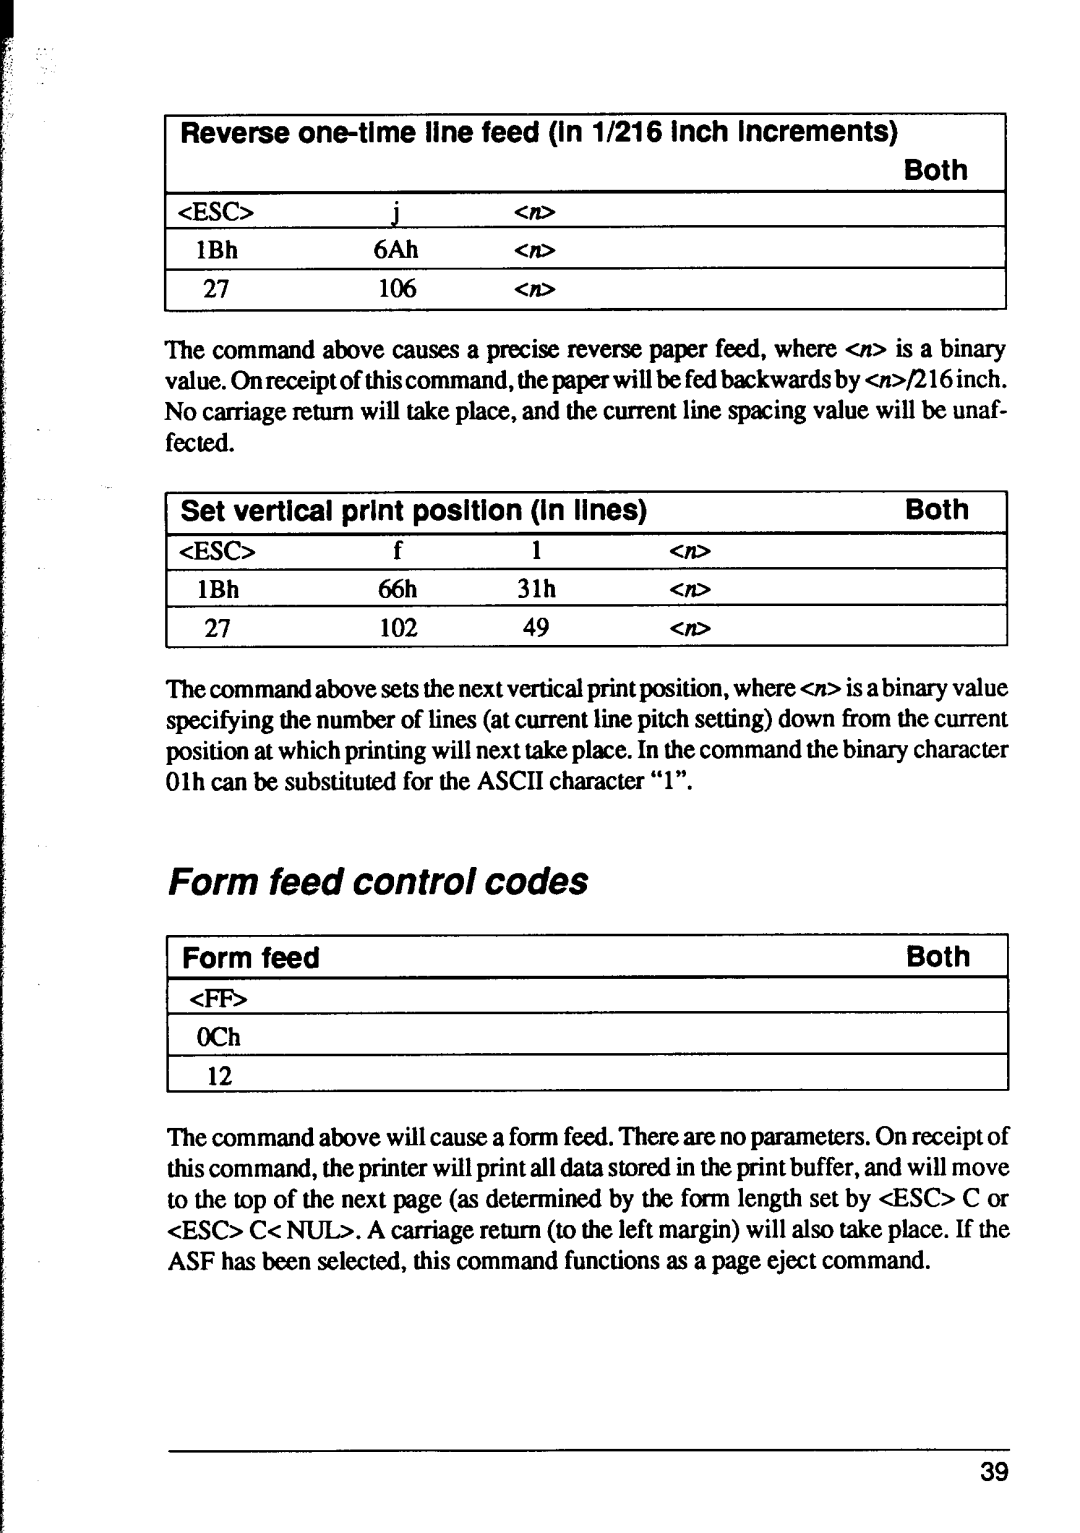 Star Micronics XR-1000 Form feed control codes, Reverse one-time line feed in l/216 inch increments Both, Form feedBoth t 